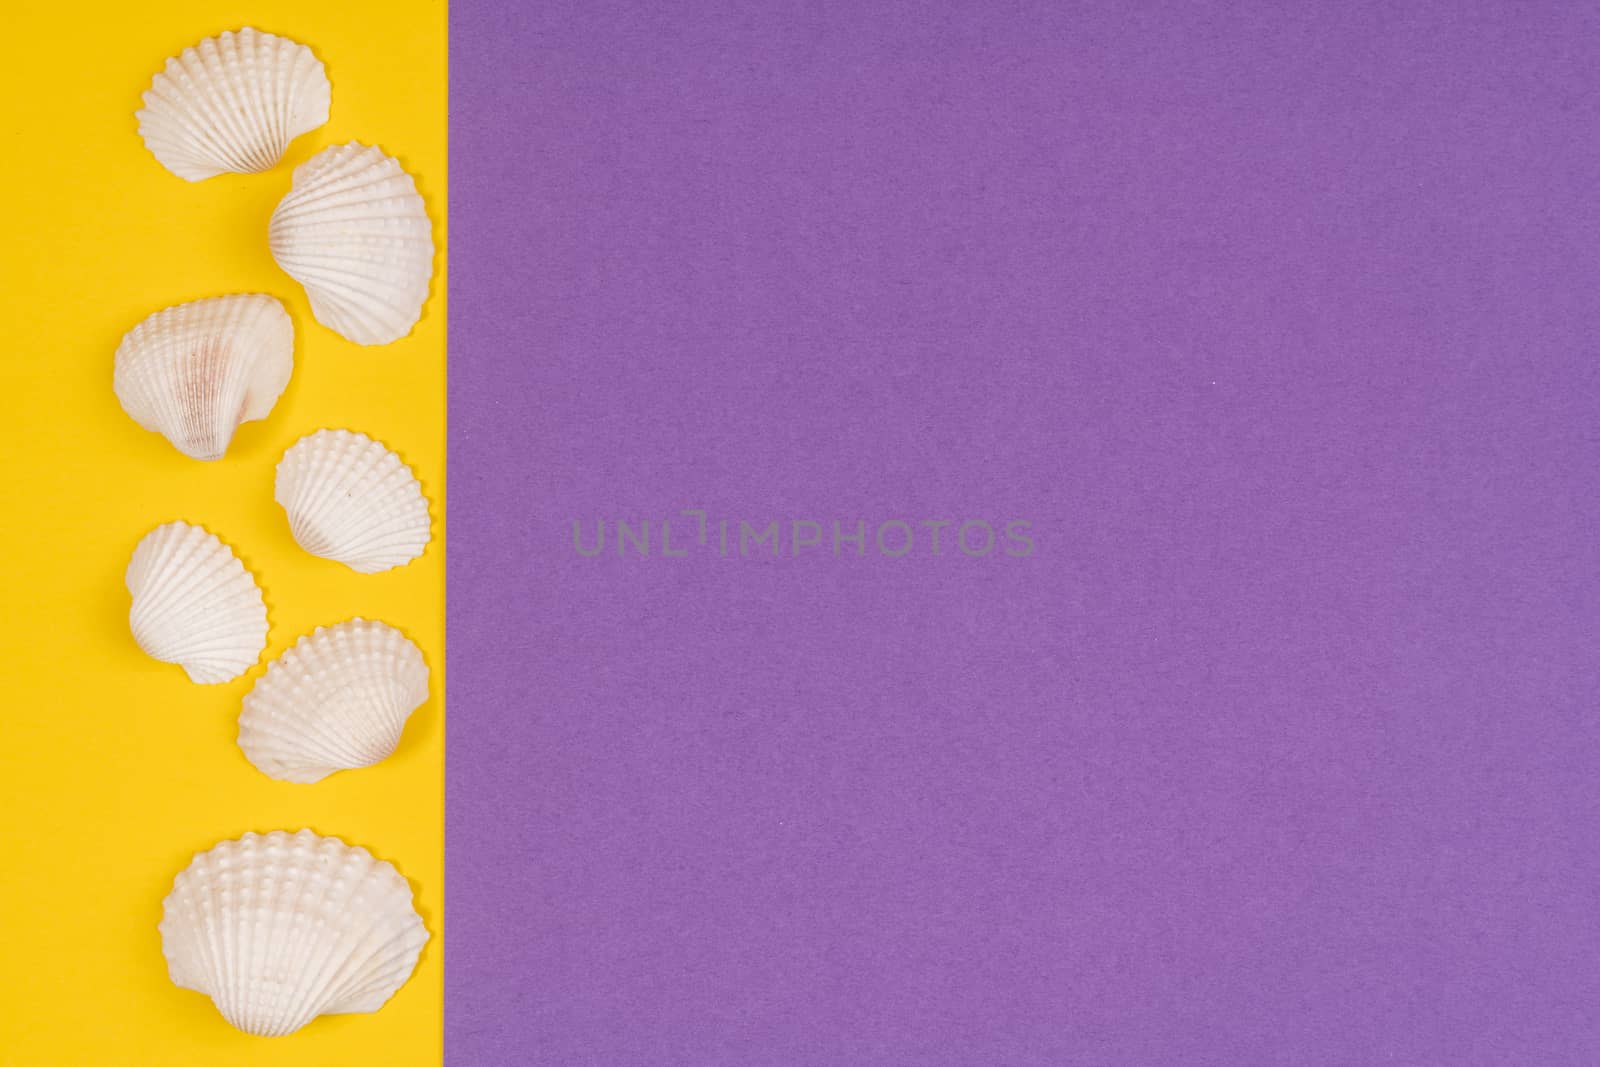 white seashells in a white frame on a colored background by sergiodv